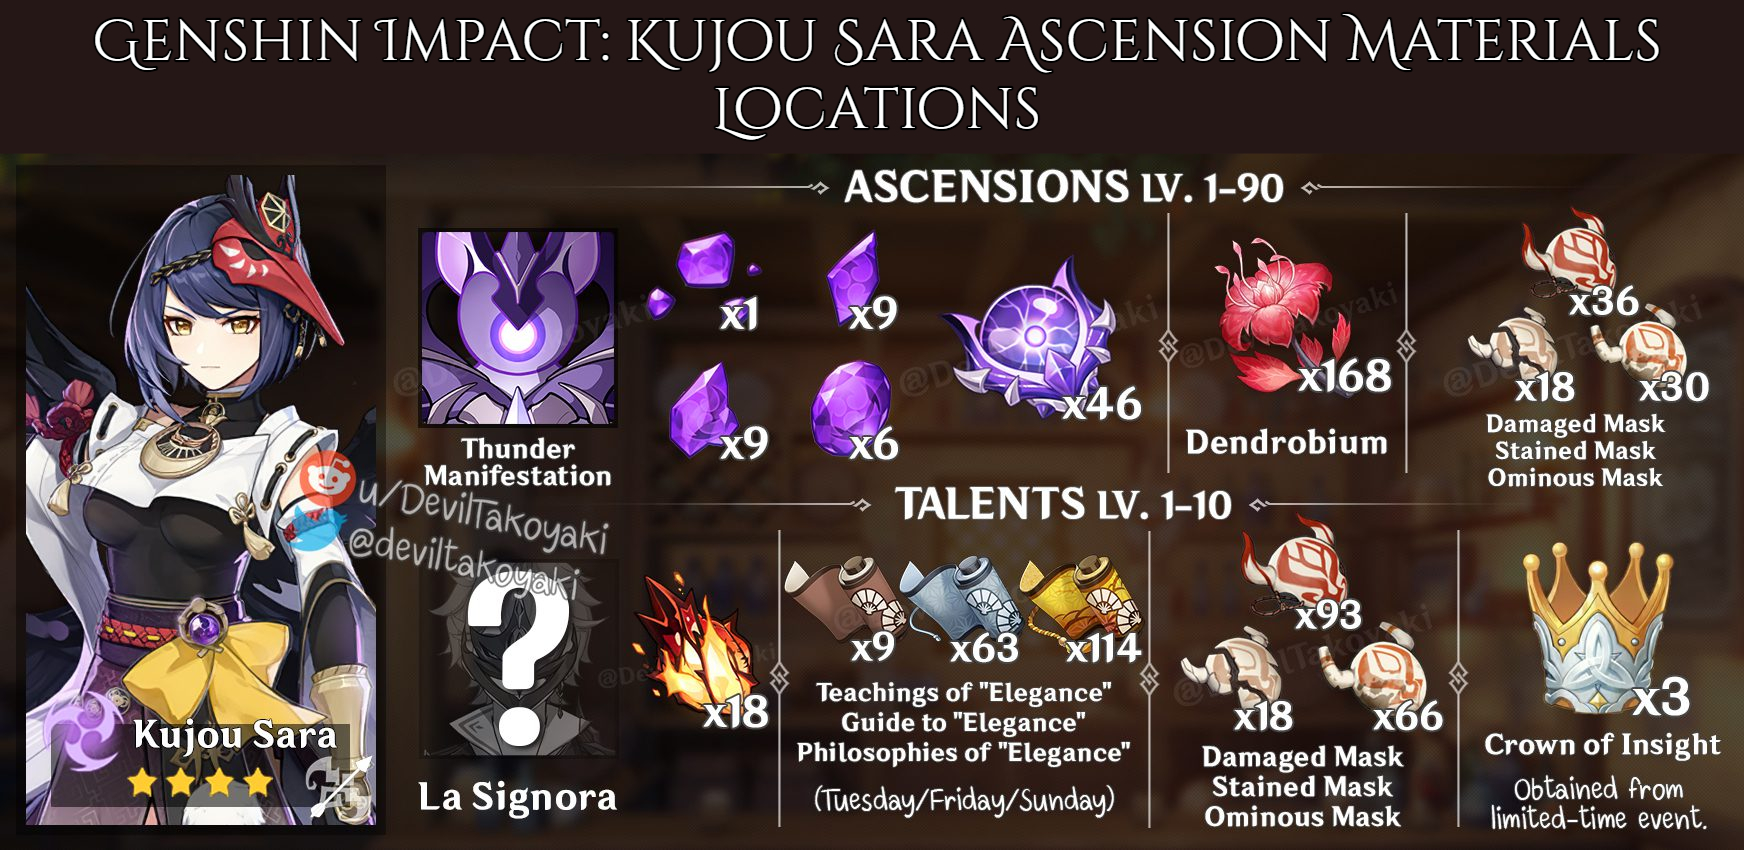 You are currently viewing Genshin Impact: Kujou Sara Ascension Materials Locations